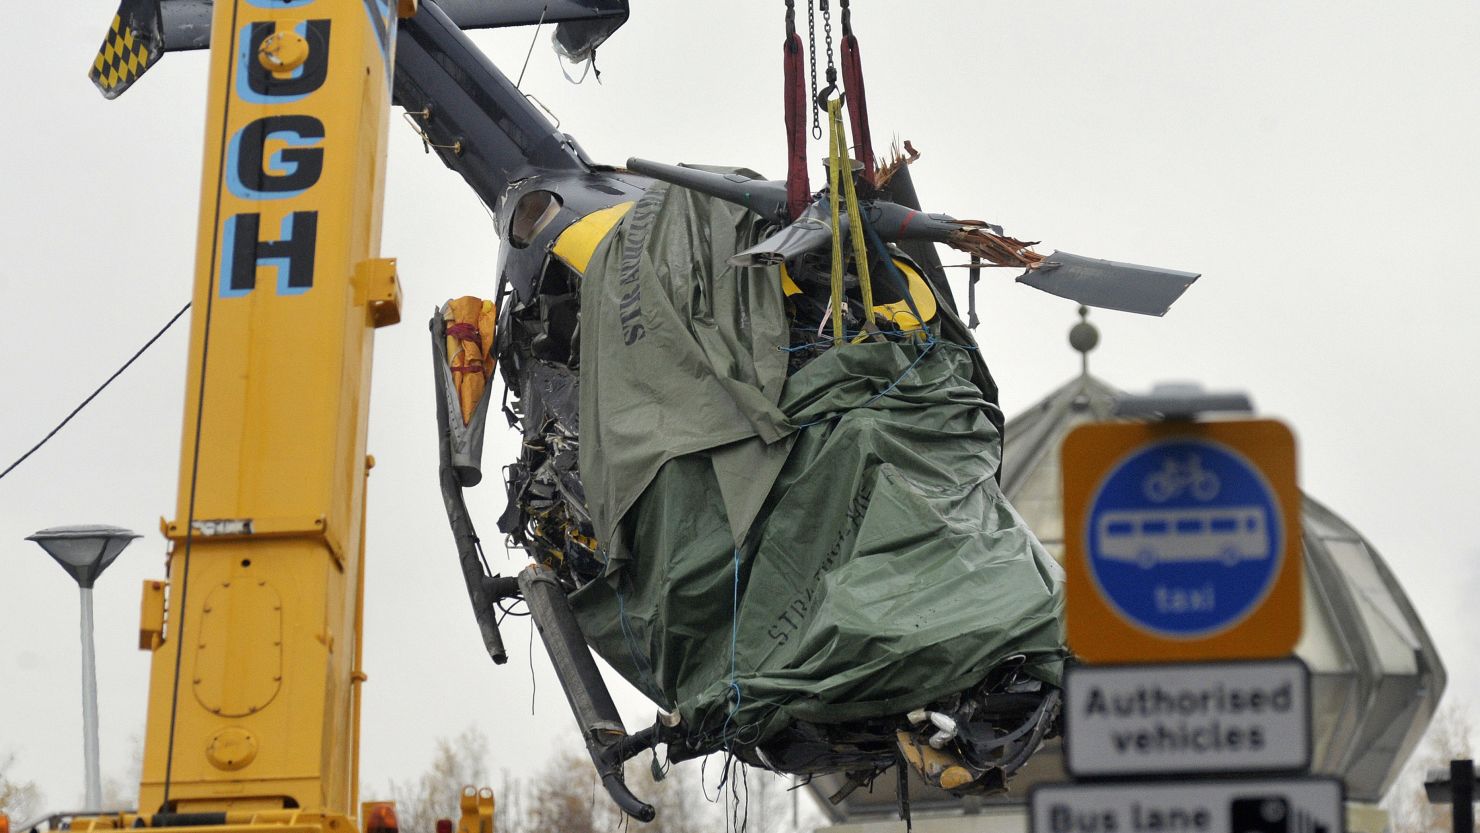 The wreckage of a police helicopter is winched from the collapsed roof of a pub in Glasgow on December 2, 2013. 